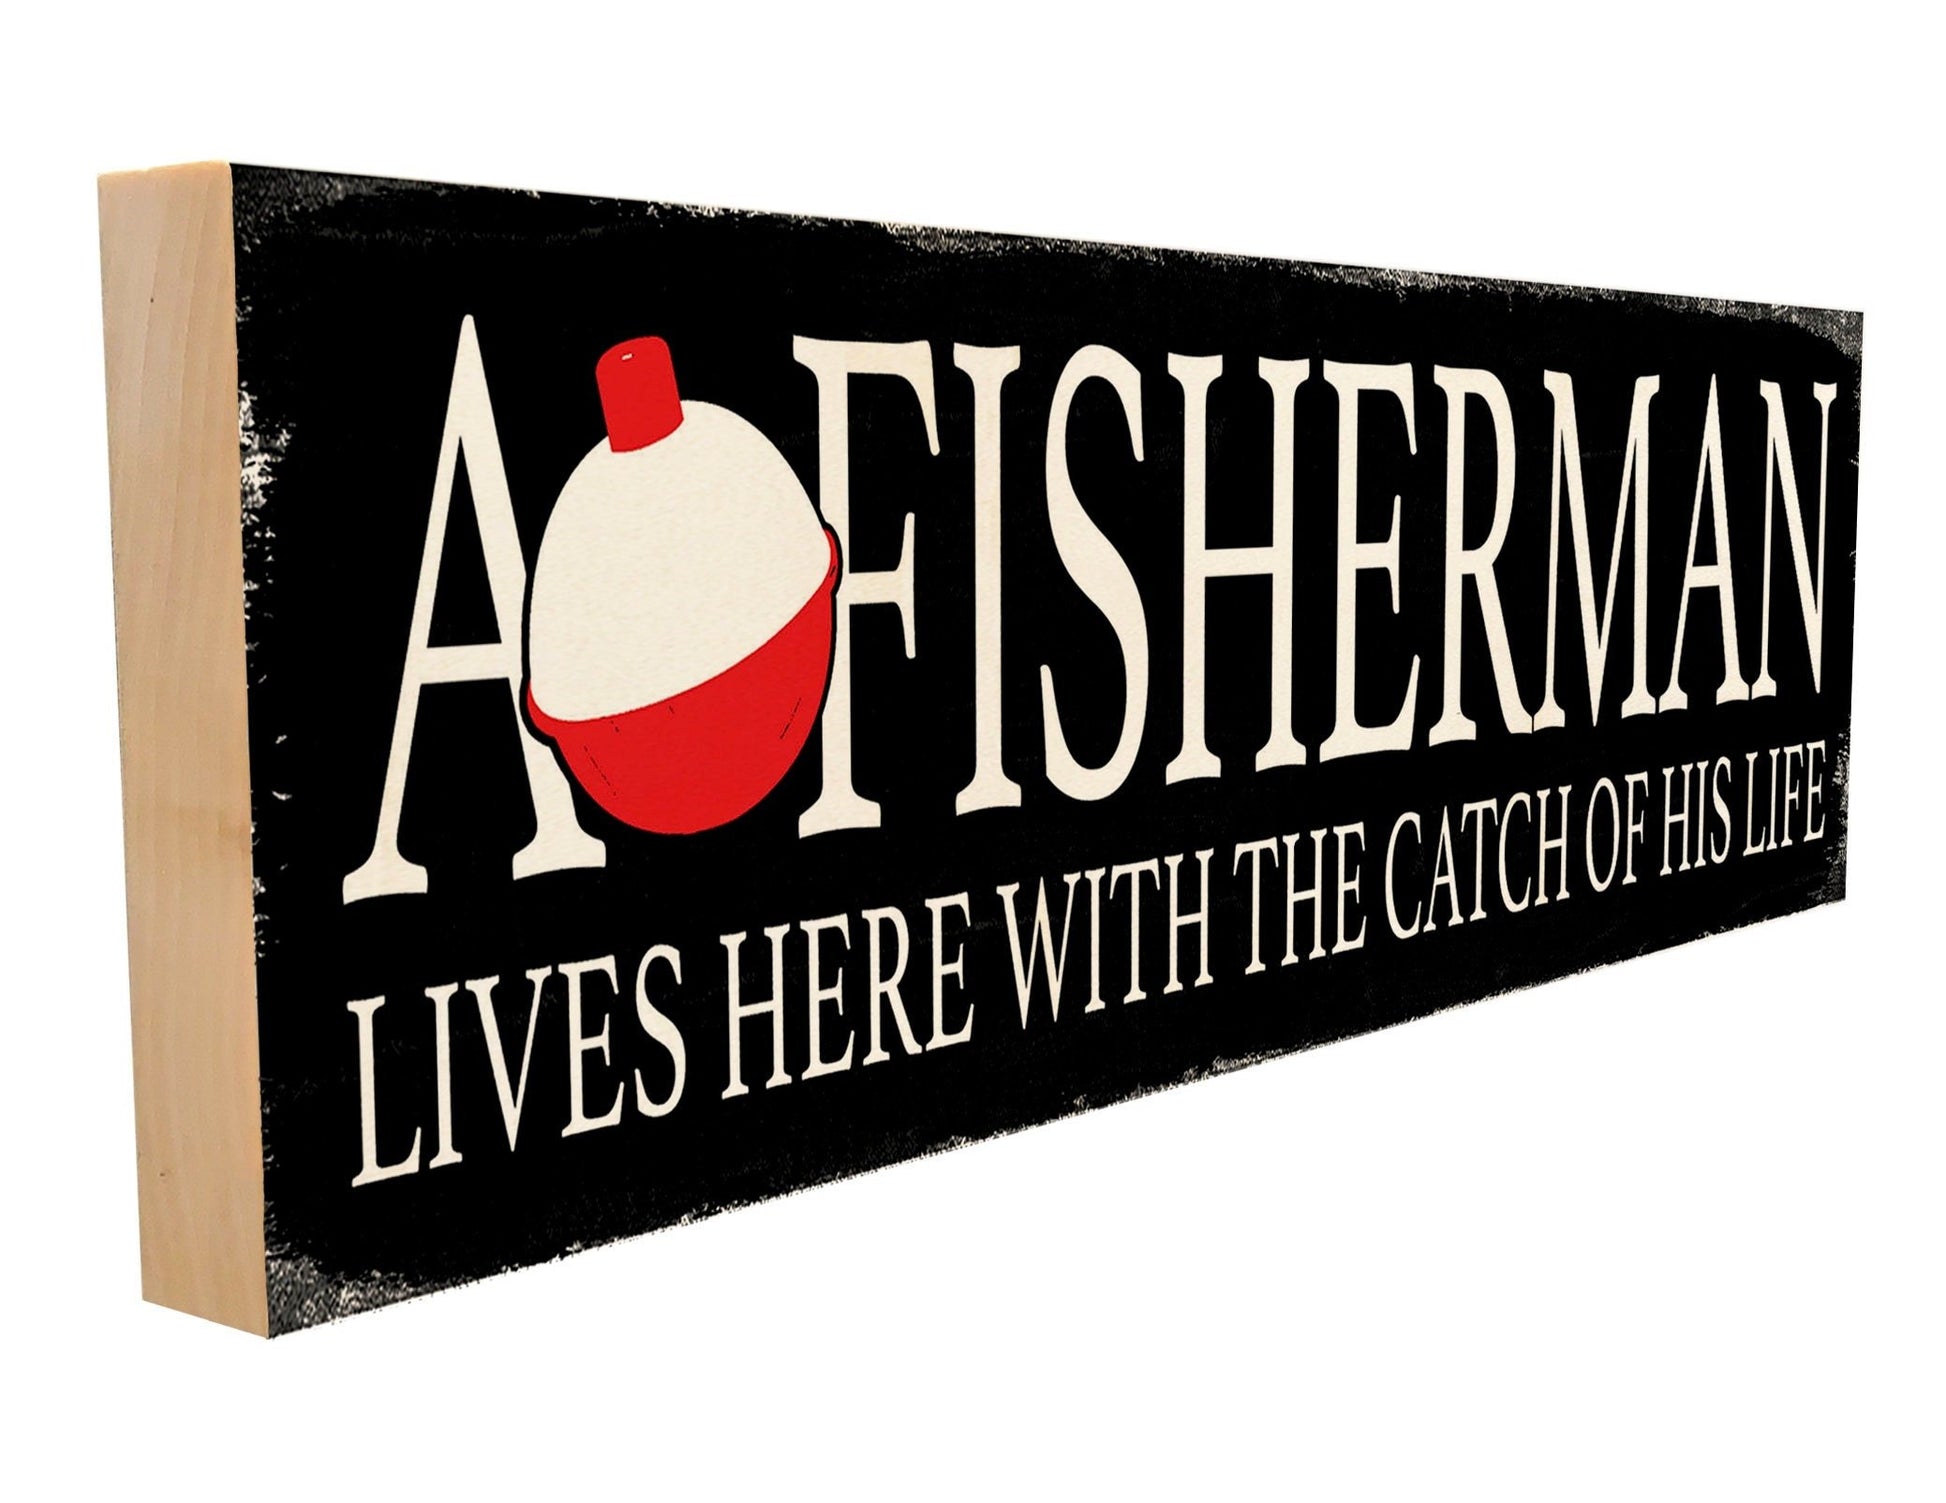 A rustic wood sign featuring the phrase 'A Fisherman Lives Here With the Catch of His Life'. The sign has a distressed finish and measures 4 inches by 12 inches. It is made of solid wood and is suitable for indoor or outdoor display.